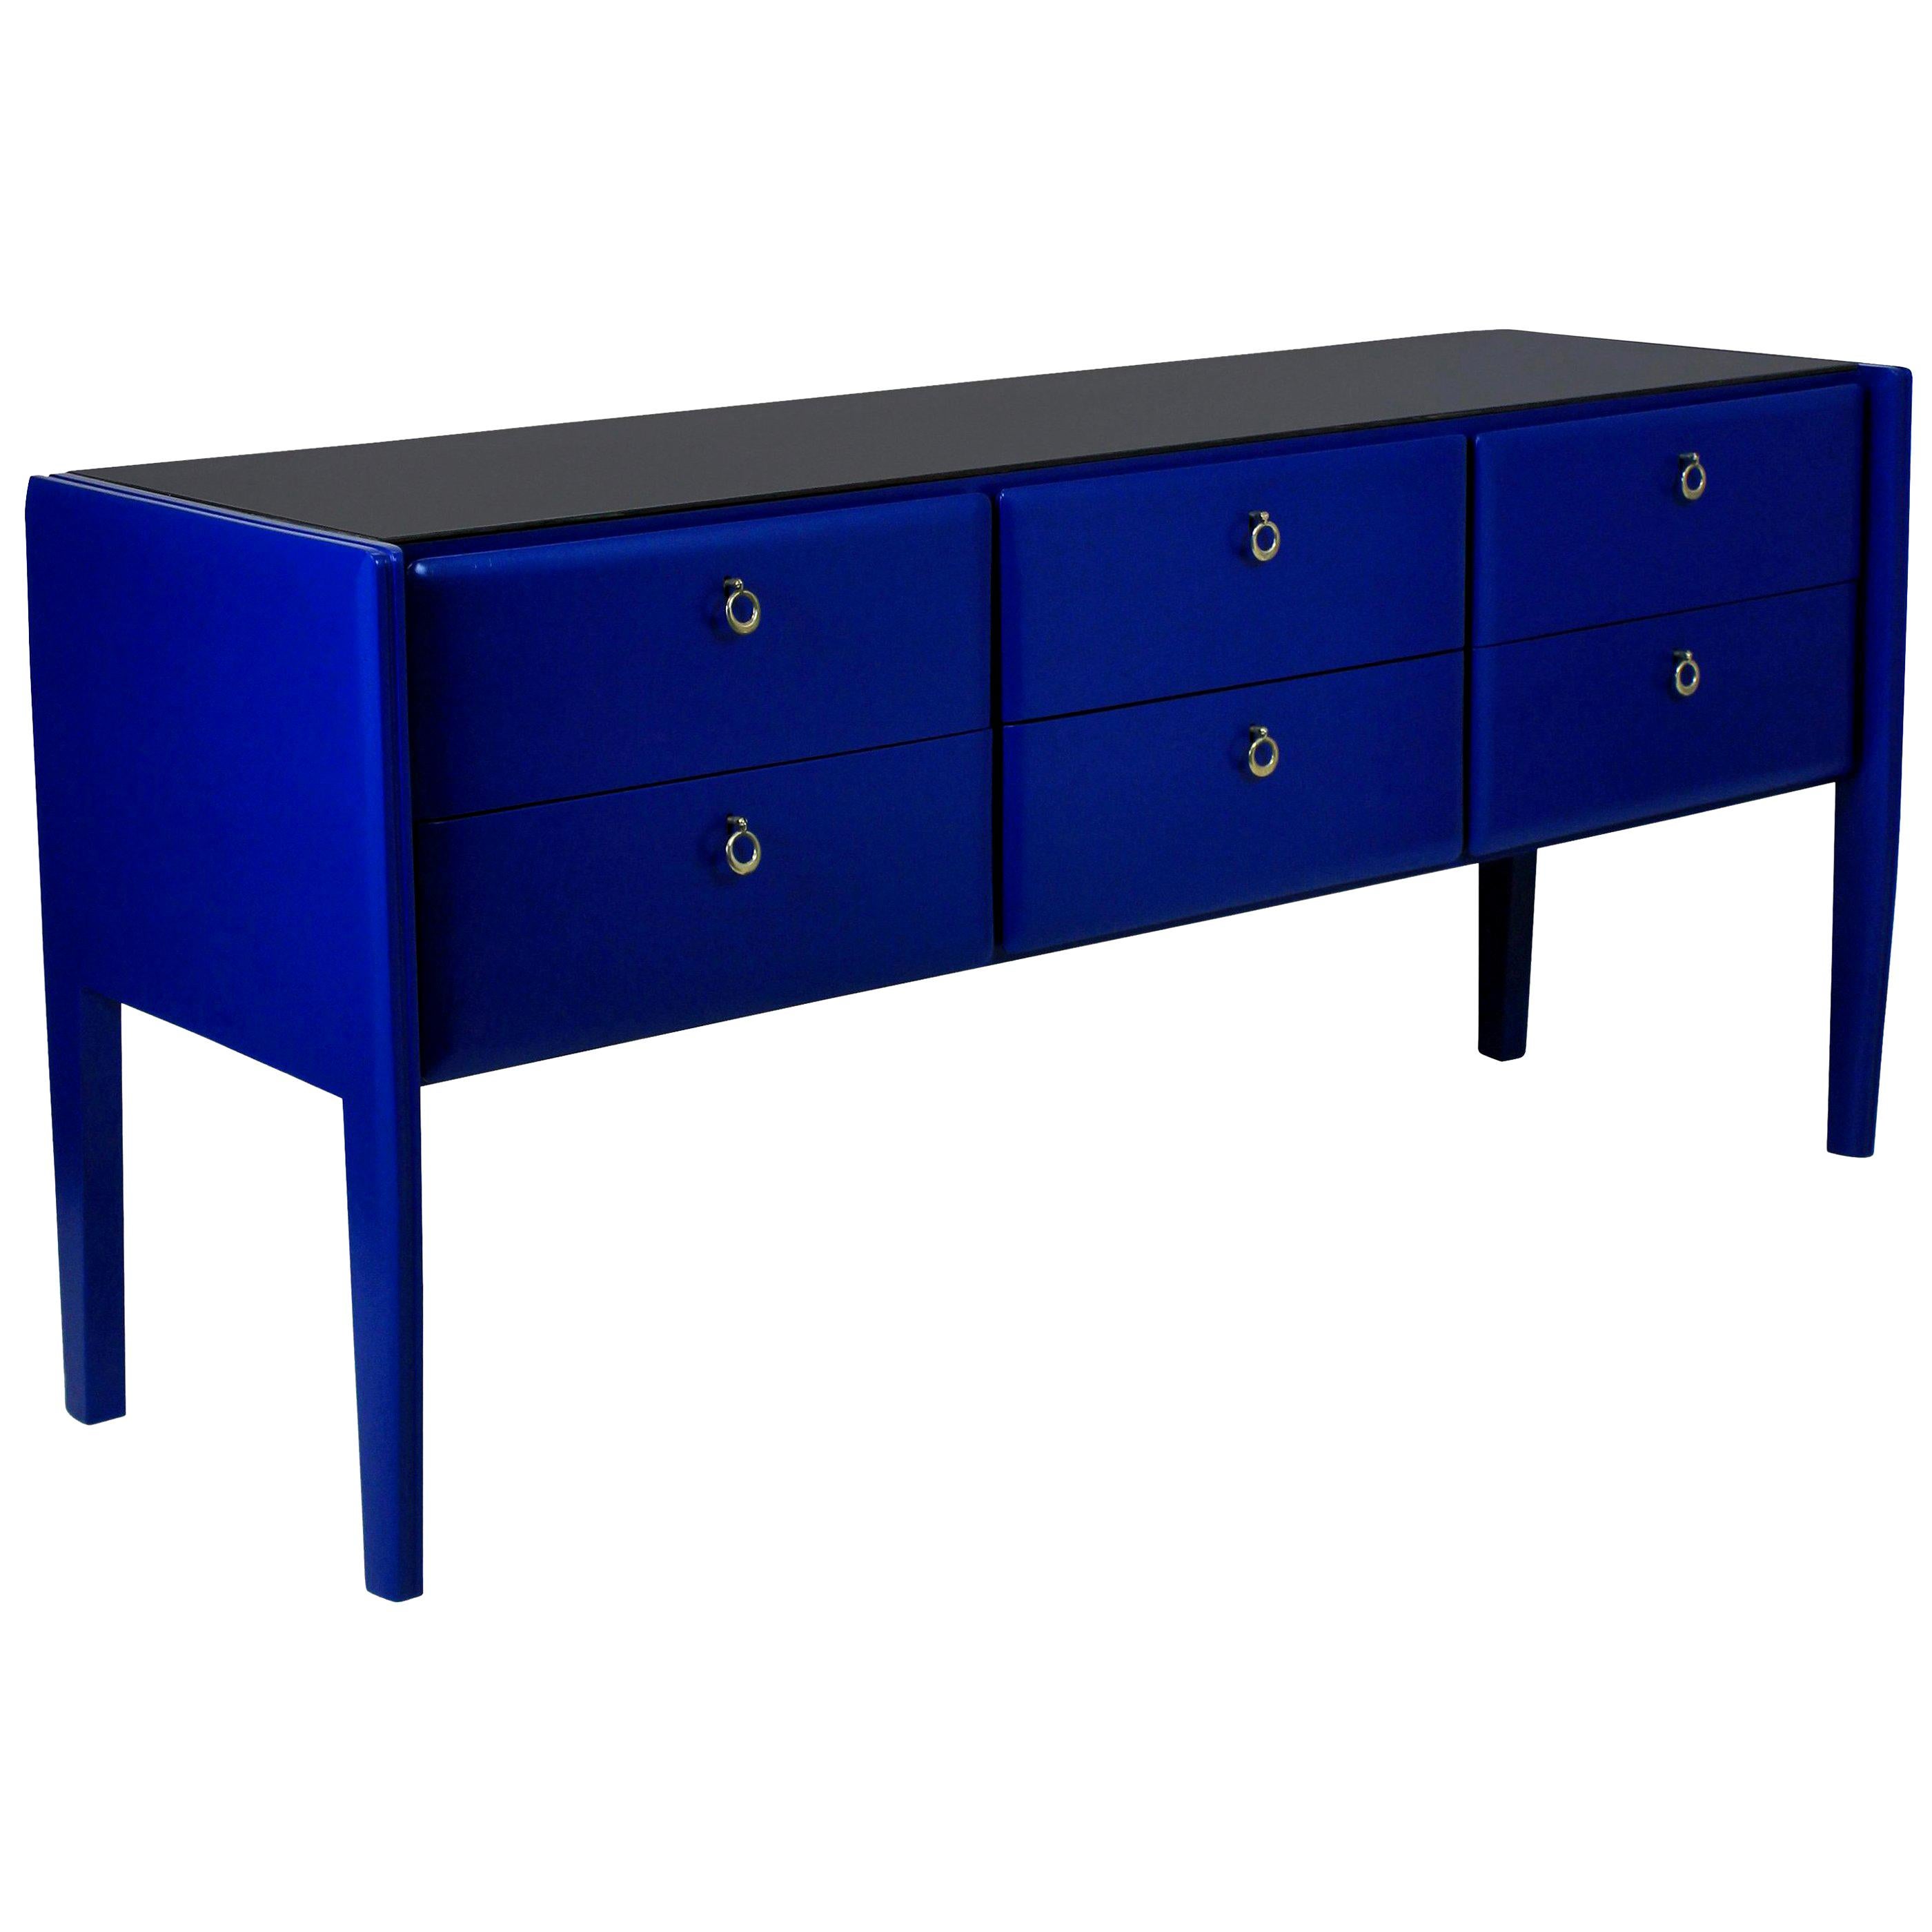 Stunning Midcentury Credenza in Cobalt Blue Lacquer